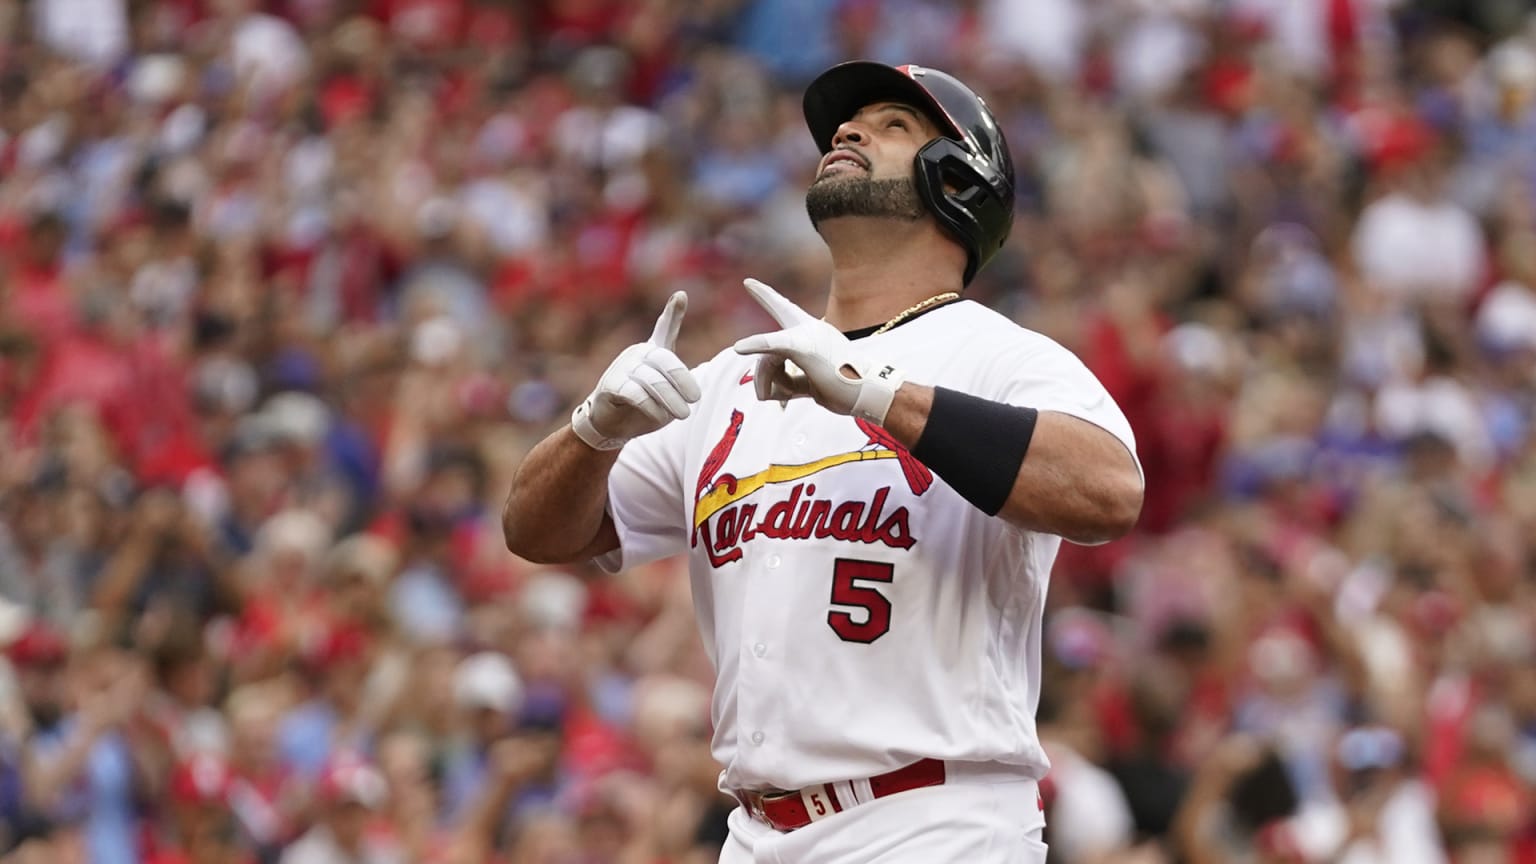 Albert Pujols points and looks to the sky after hitting a home run